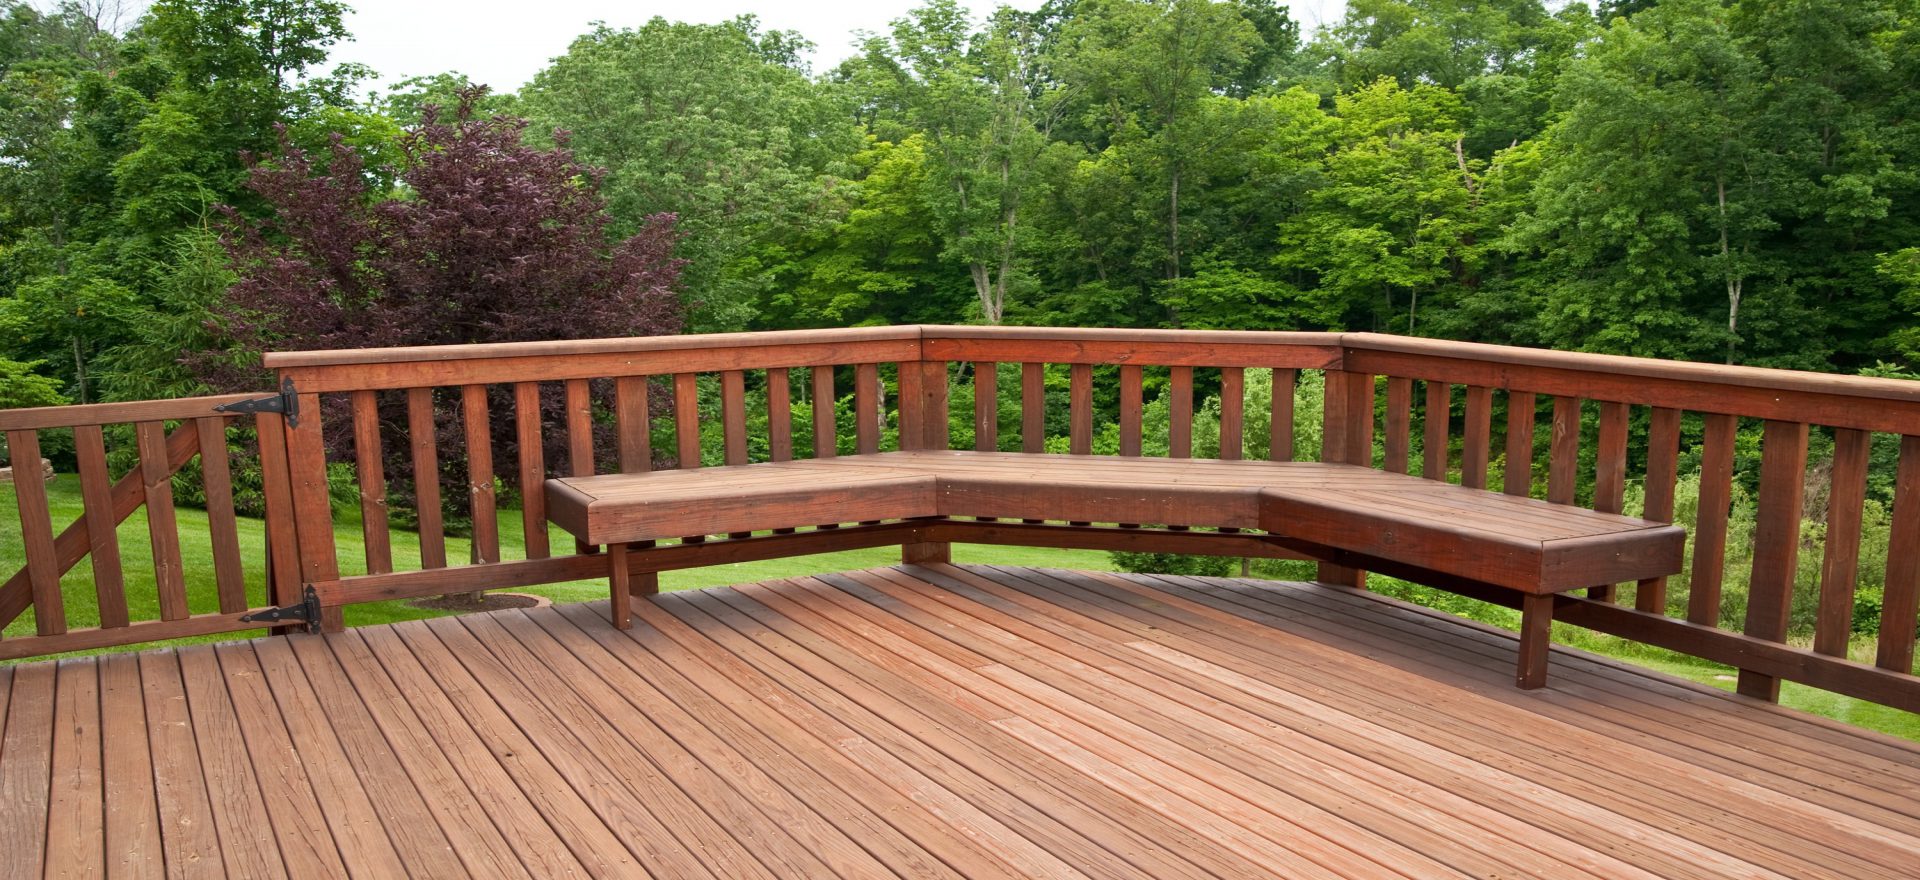 Deck and Fence 6